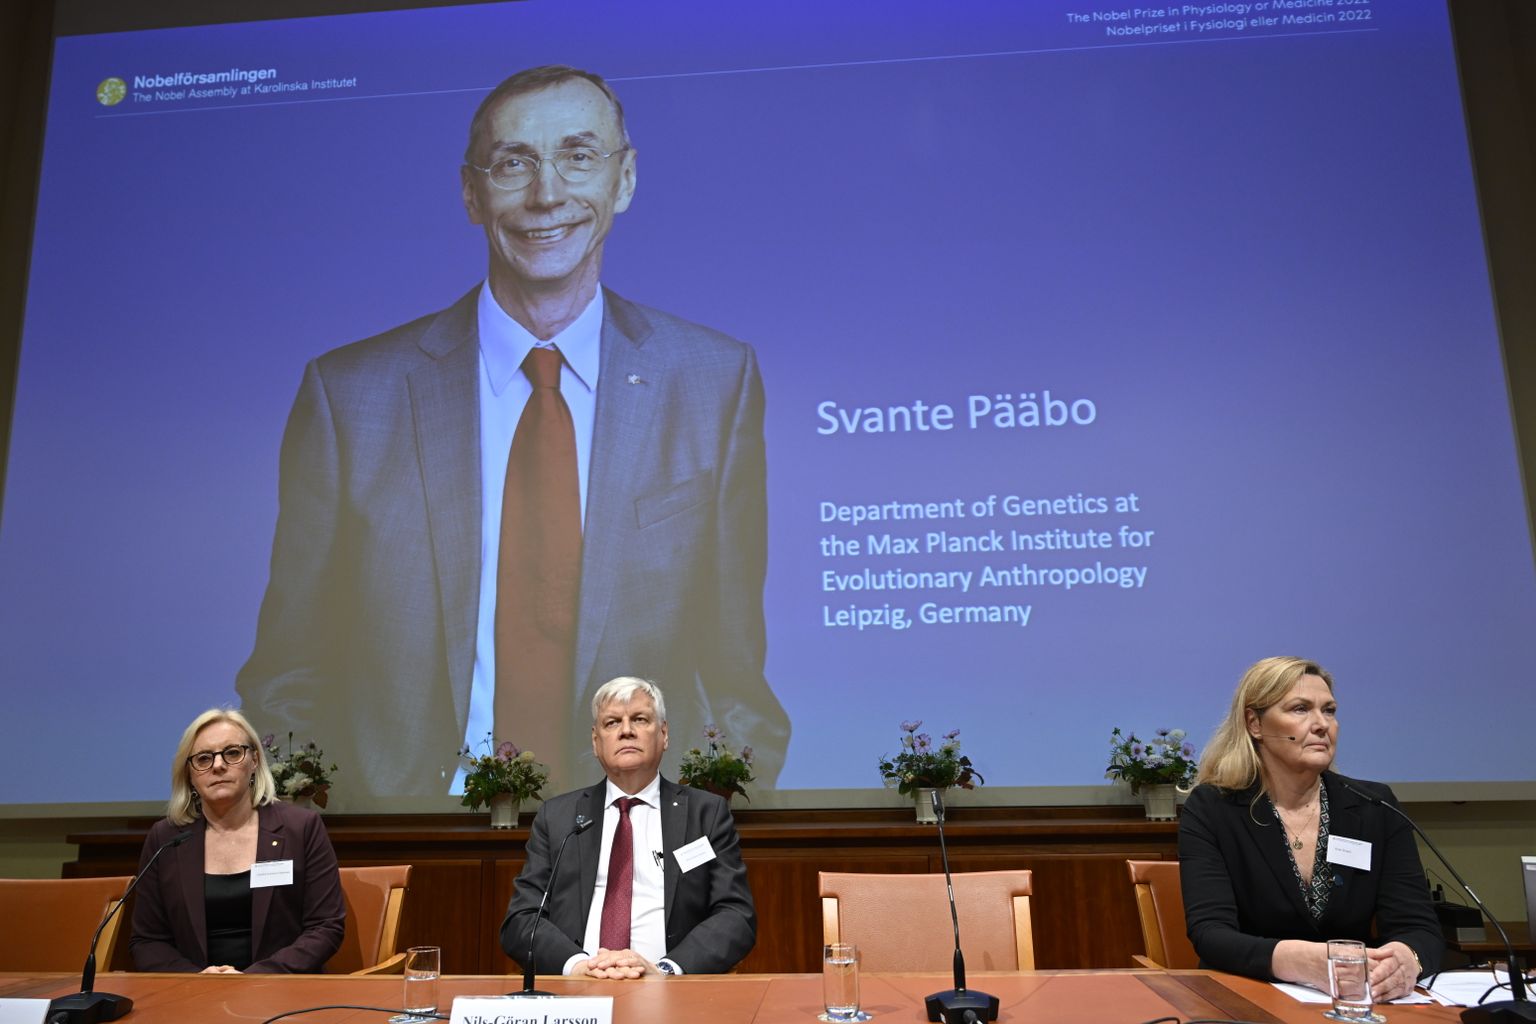 (L-R) Member of the Nobel Committee for Physiology or Medicine (L-R) Gunilla Karlsson-Hedestam, Chair of the Nobel Committee for Physiology or Medicine Nils-Goran Larsson and member of the Nobel Assembly at Karolinska Institutet Anna Wedell listen to the announcement of the 2022 Nobel laureate in physiology and medicine Svante Pääbo of Sweden (seen on the screen) during a press conference at the Karolinska Institute in Stockholm,